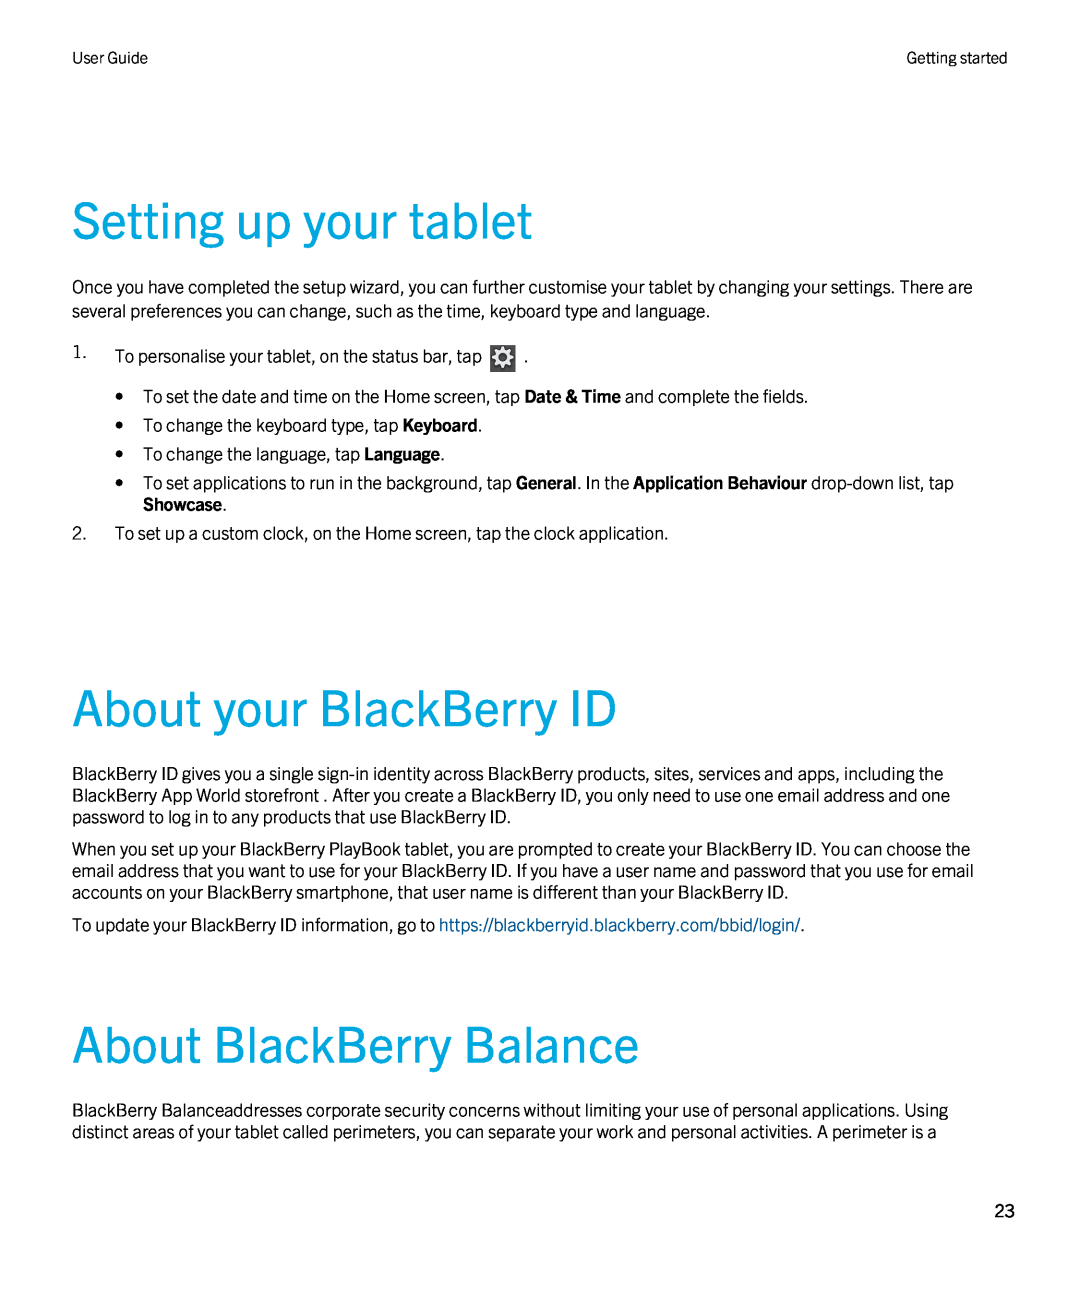 Blackberry 2.0.1 manual Setting up your tablet, About your BlackBerry ID, About BlackBerry Balance 